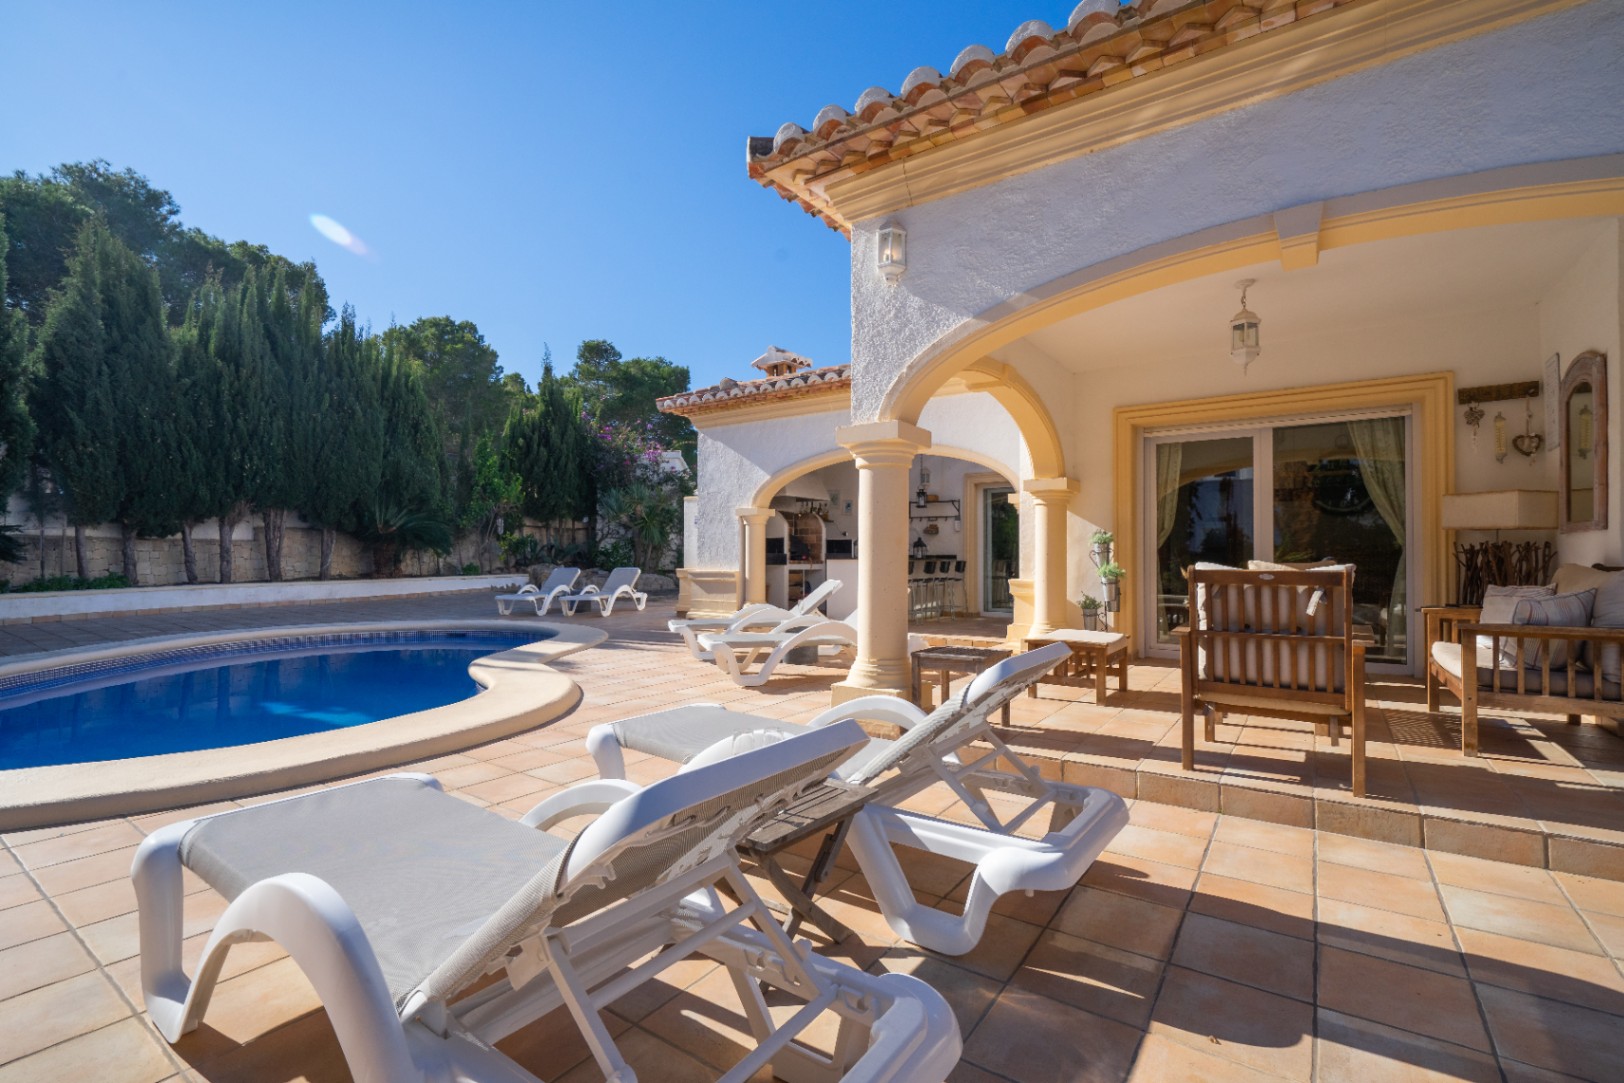 Beautiful 3 bedroom villa within a stones throw to Moraira town and beaches